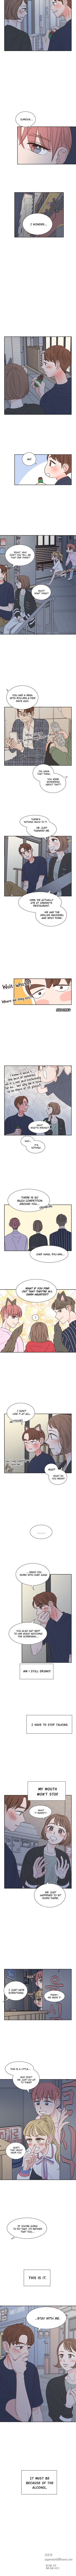 One Of A Kind Romance ch.71